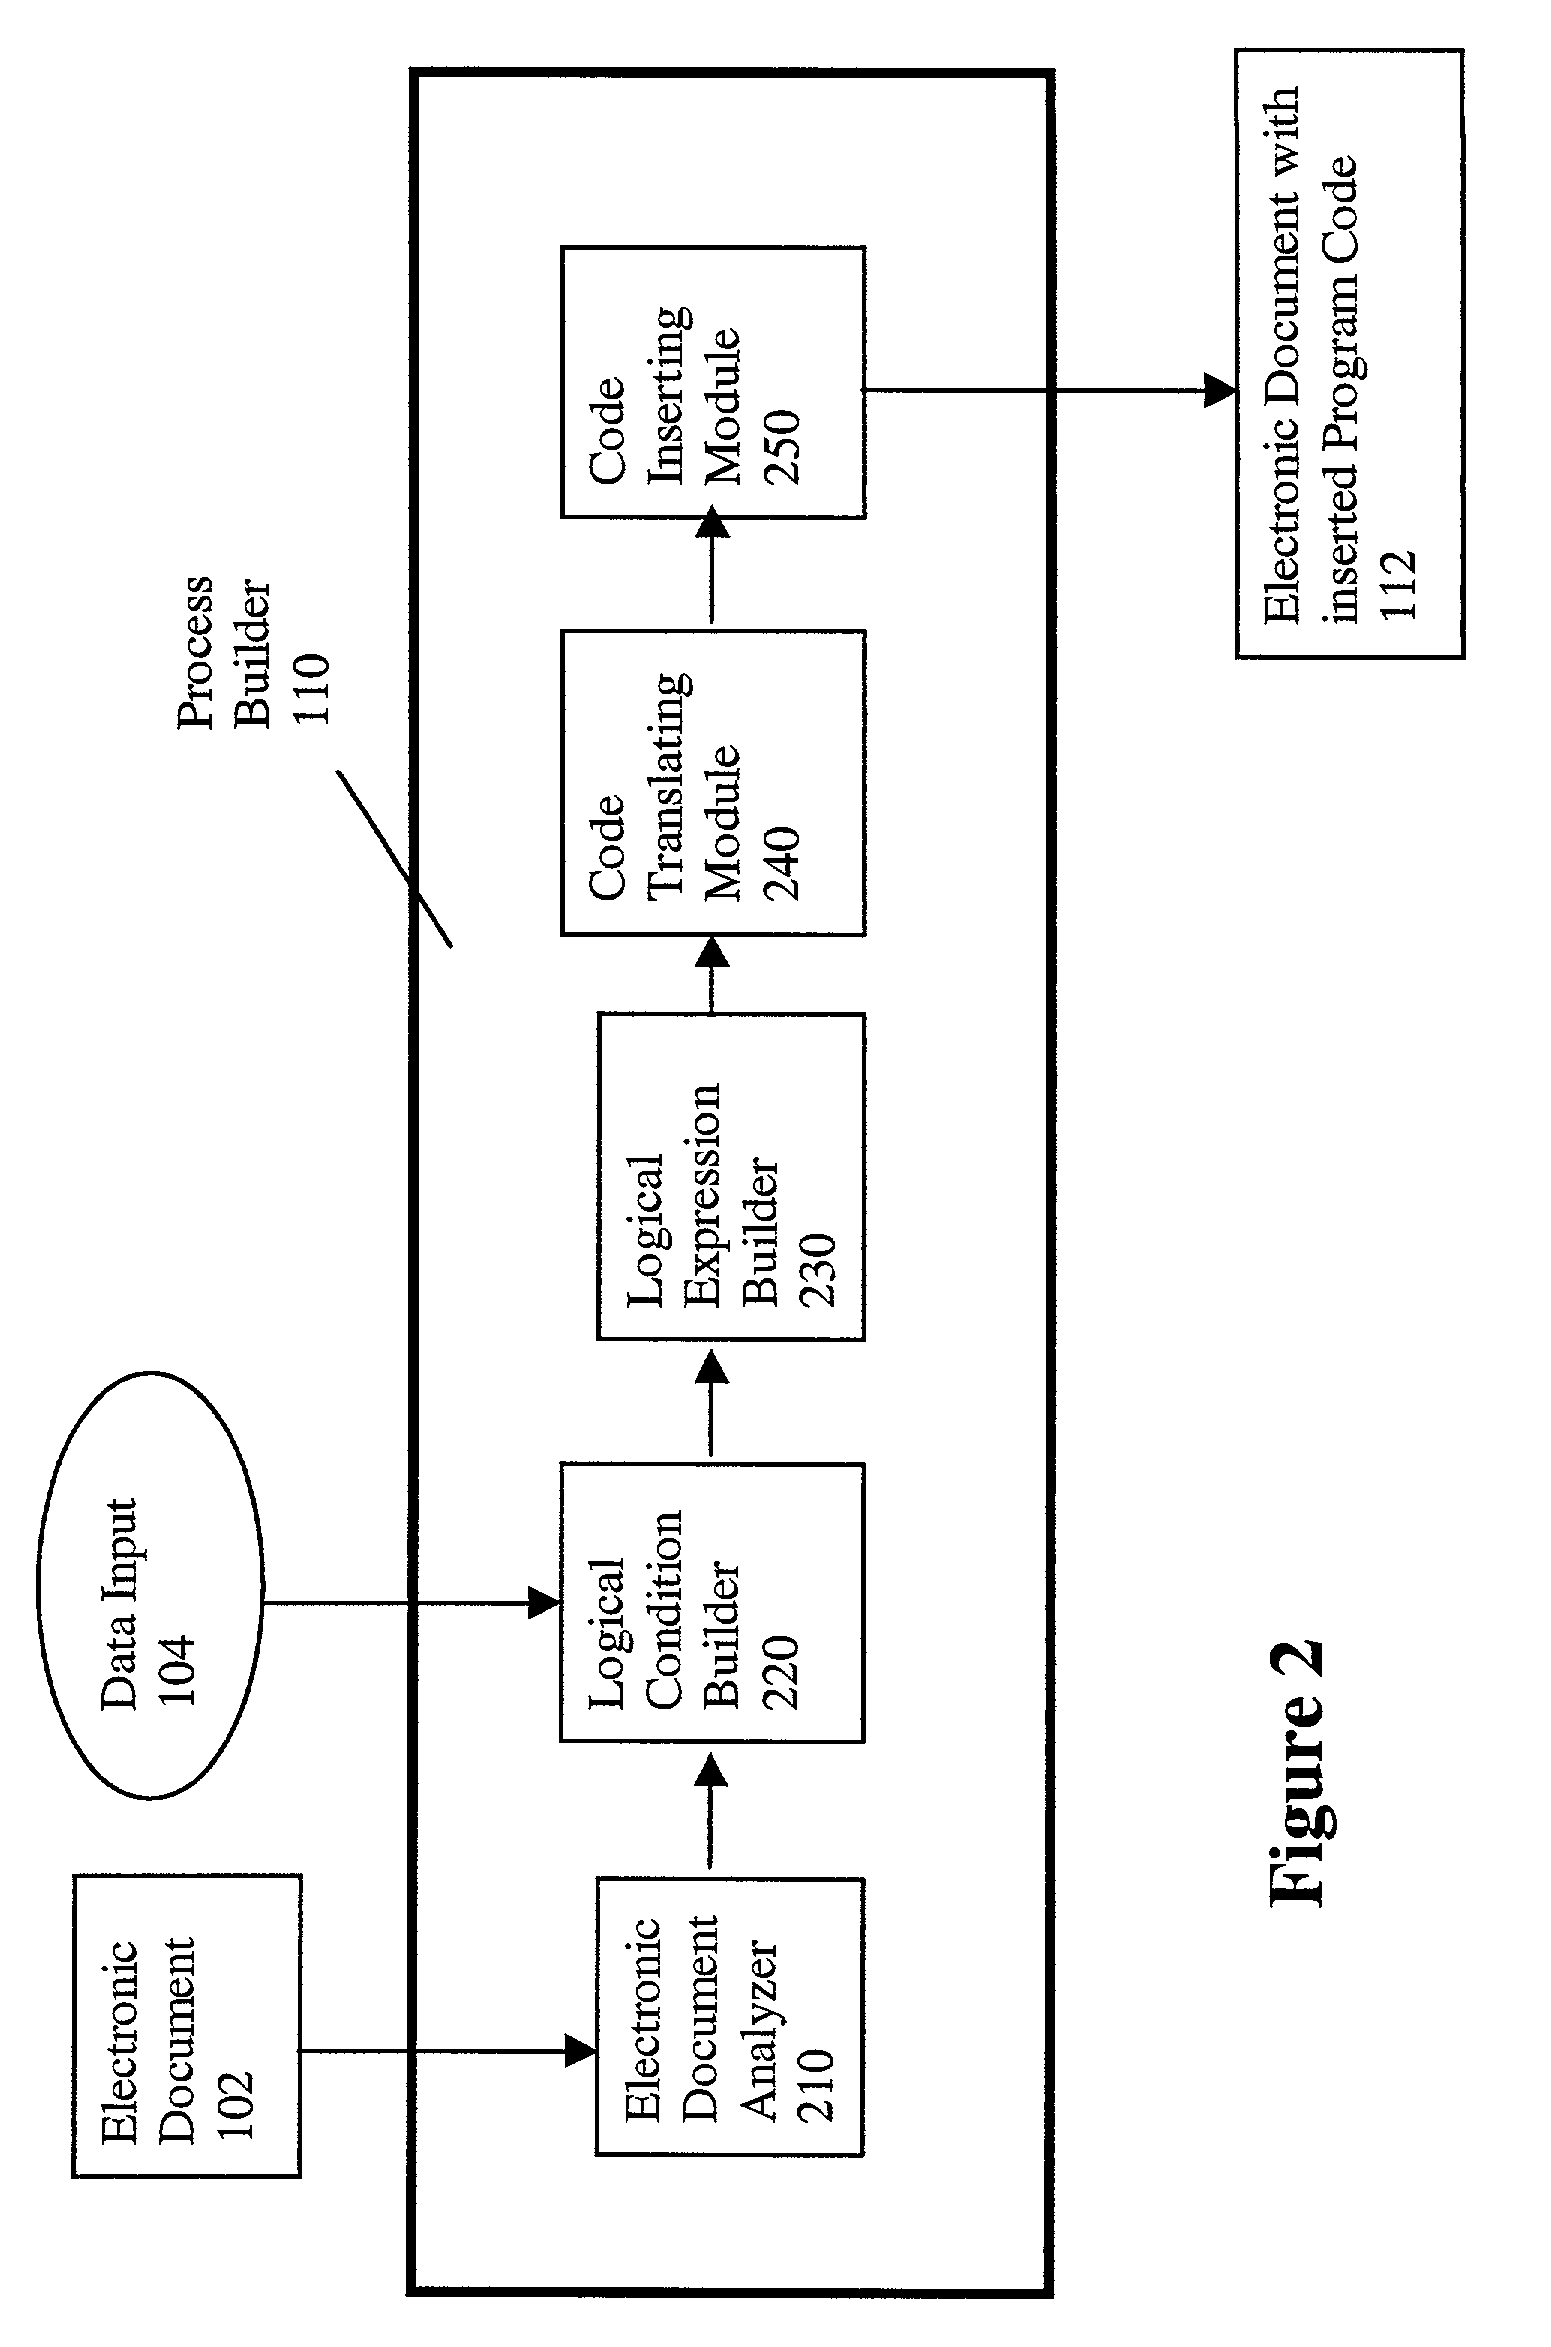 Process builder for a routable electronic document system and method for using the same